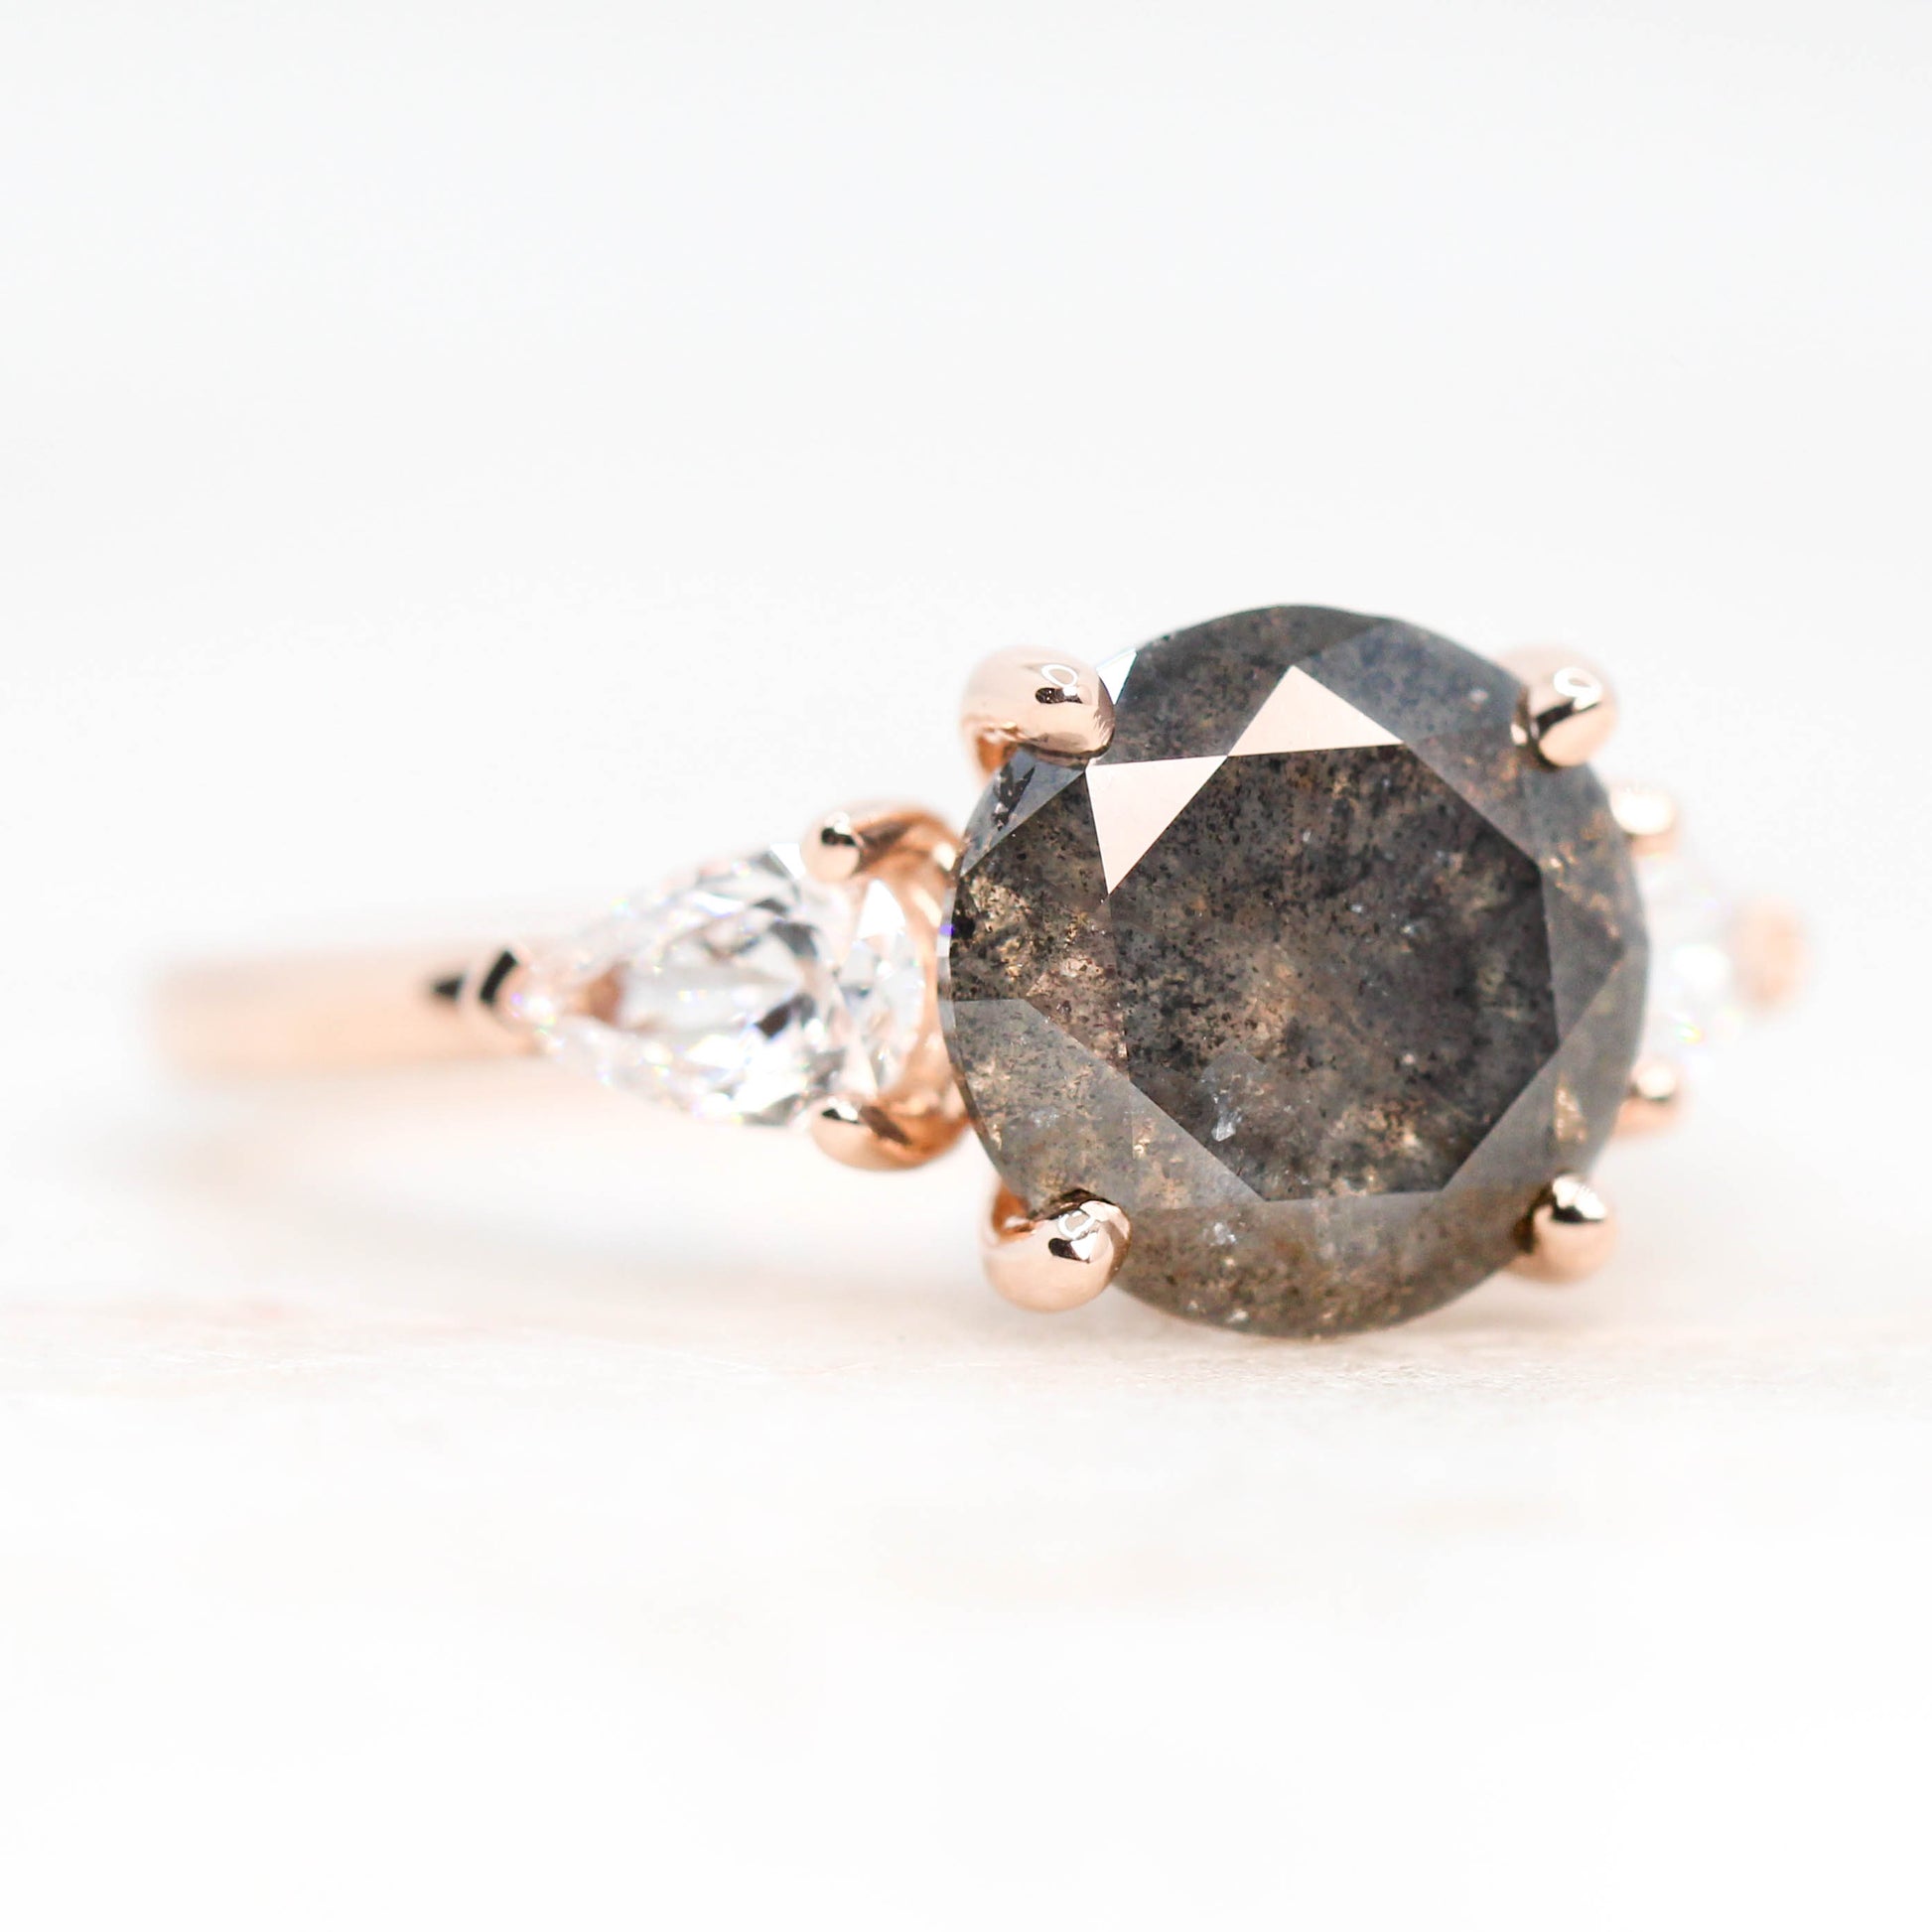 Faye Ring with a 3.46 Carat Celestial Gray Round Diamond and Clear White Accent Diamonds in 14k Rose Gold - Ready to Size and Ship - Midwinter Co. Alternative Bridal Rings and Modern Fine Jewelry